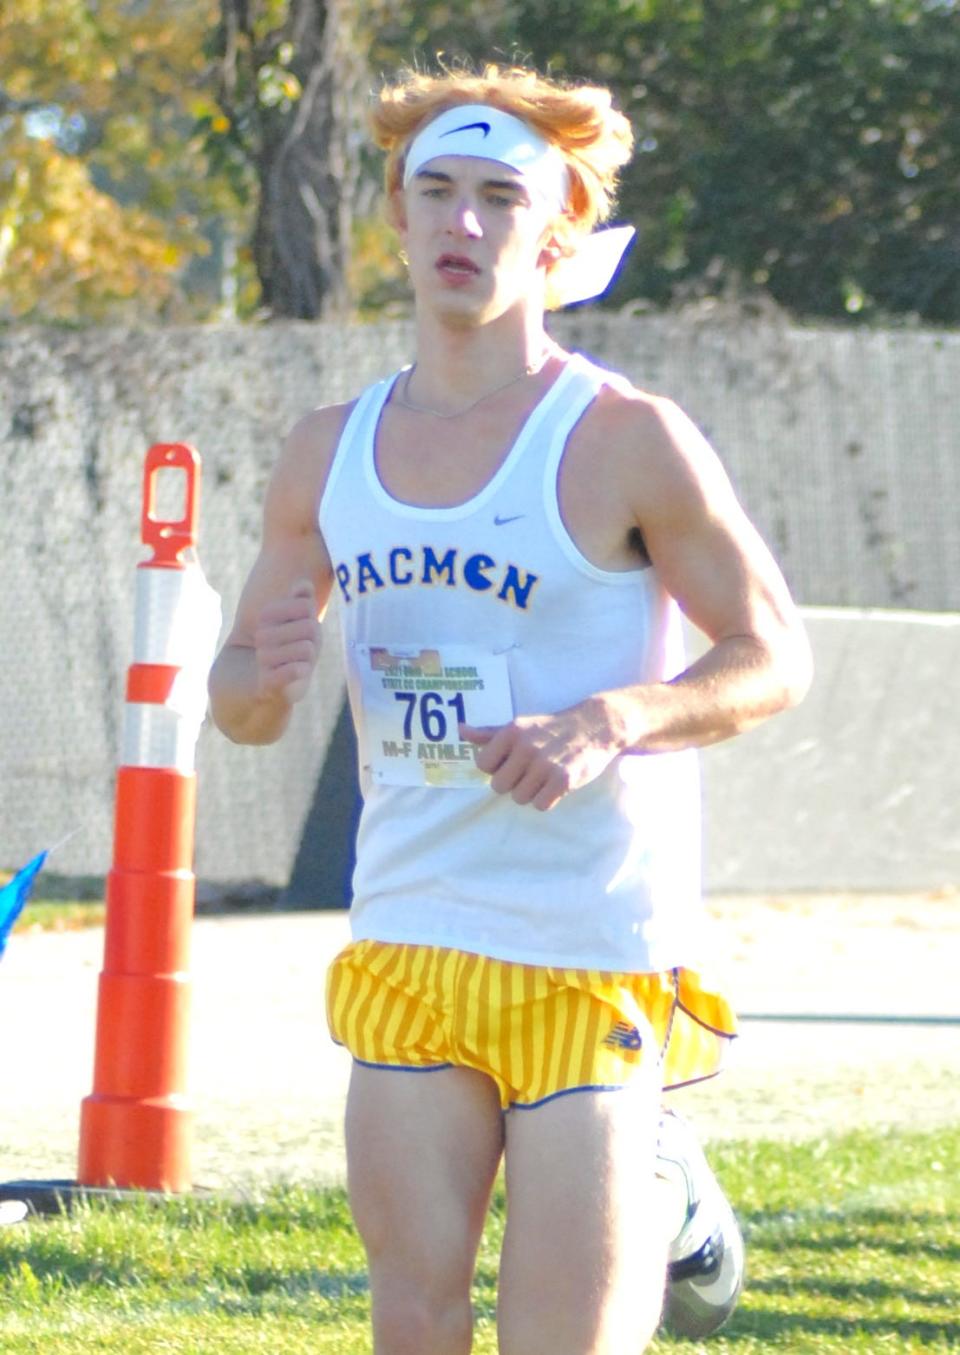 Landen Demos finished 54th at Fortress Obetz with a time of 16:56.3.